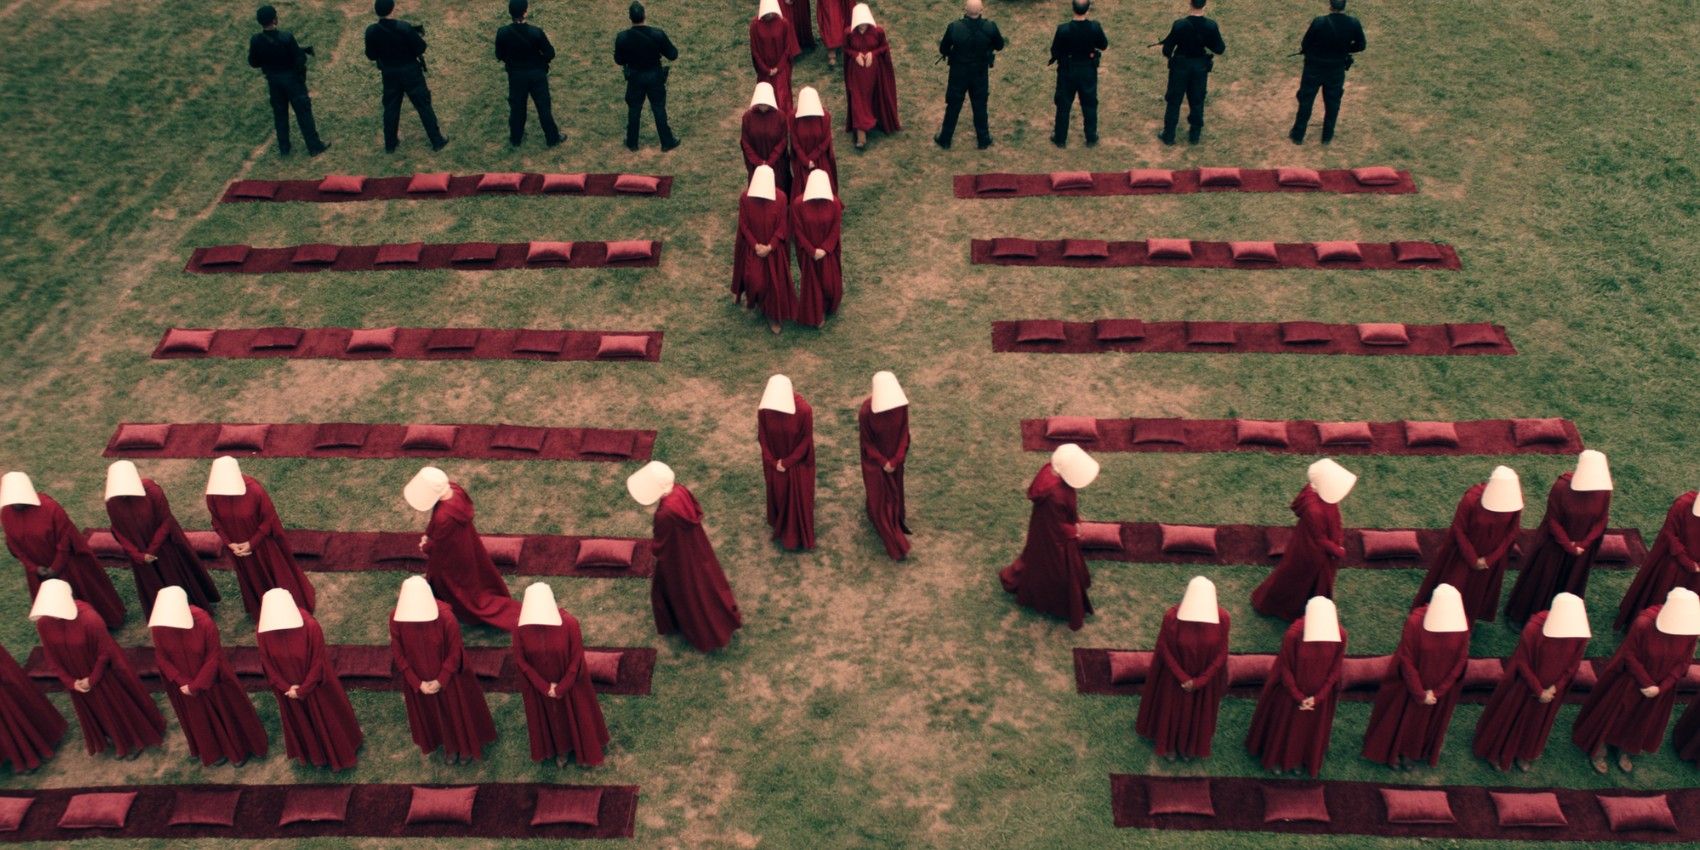 A crowd of handmaids in The Handmaid's Tale 